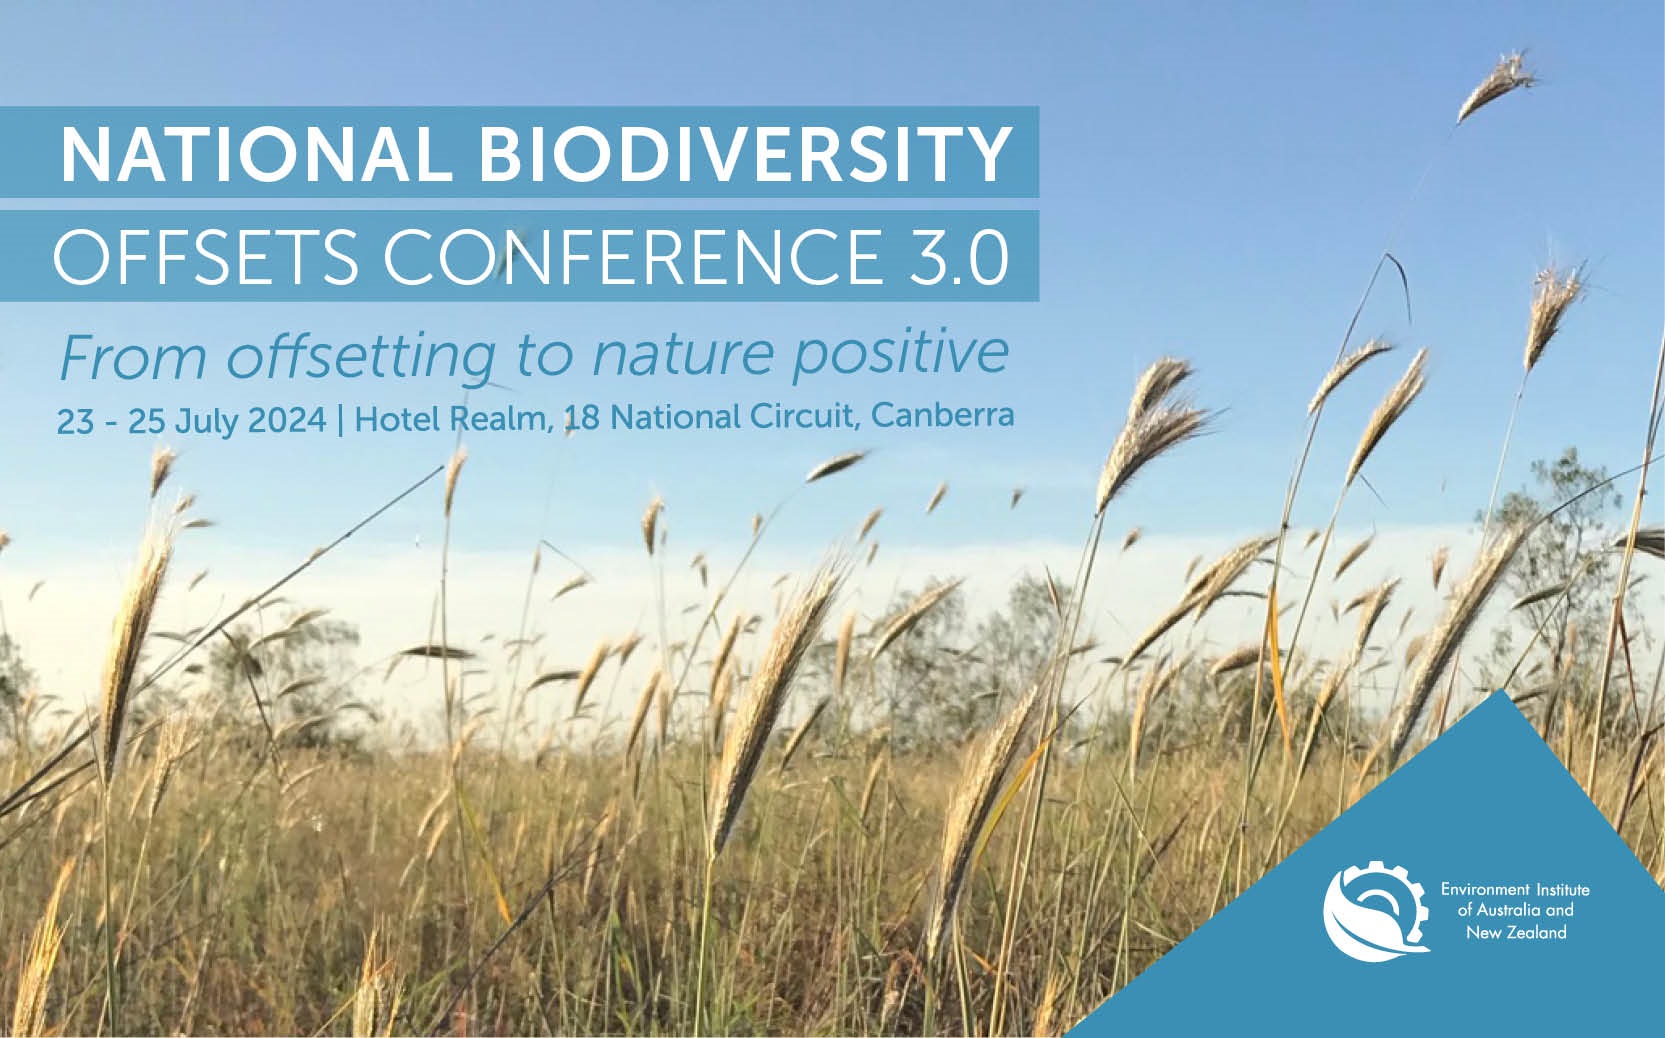 National Biodiversity Offsets Conference 3.0